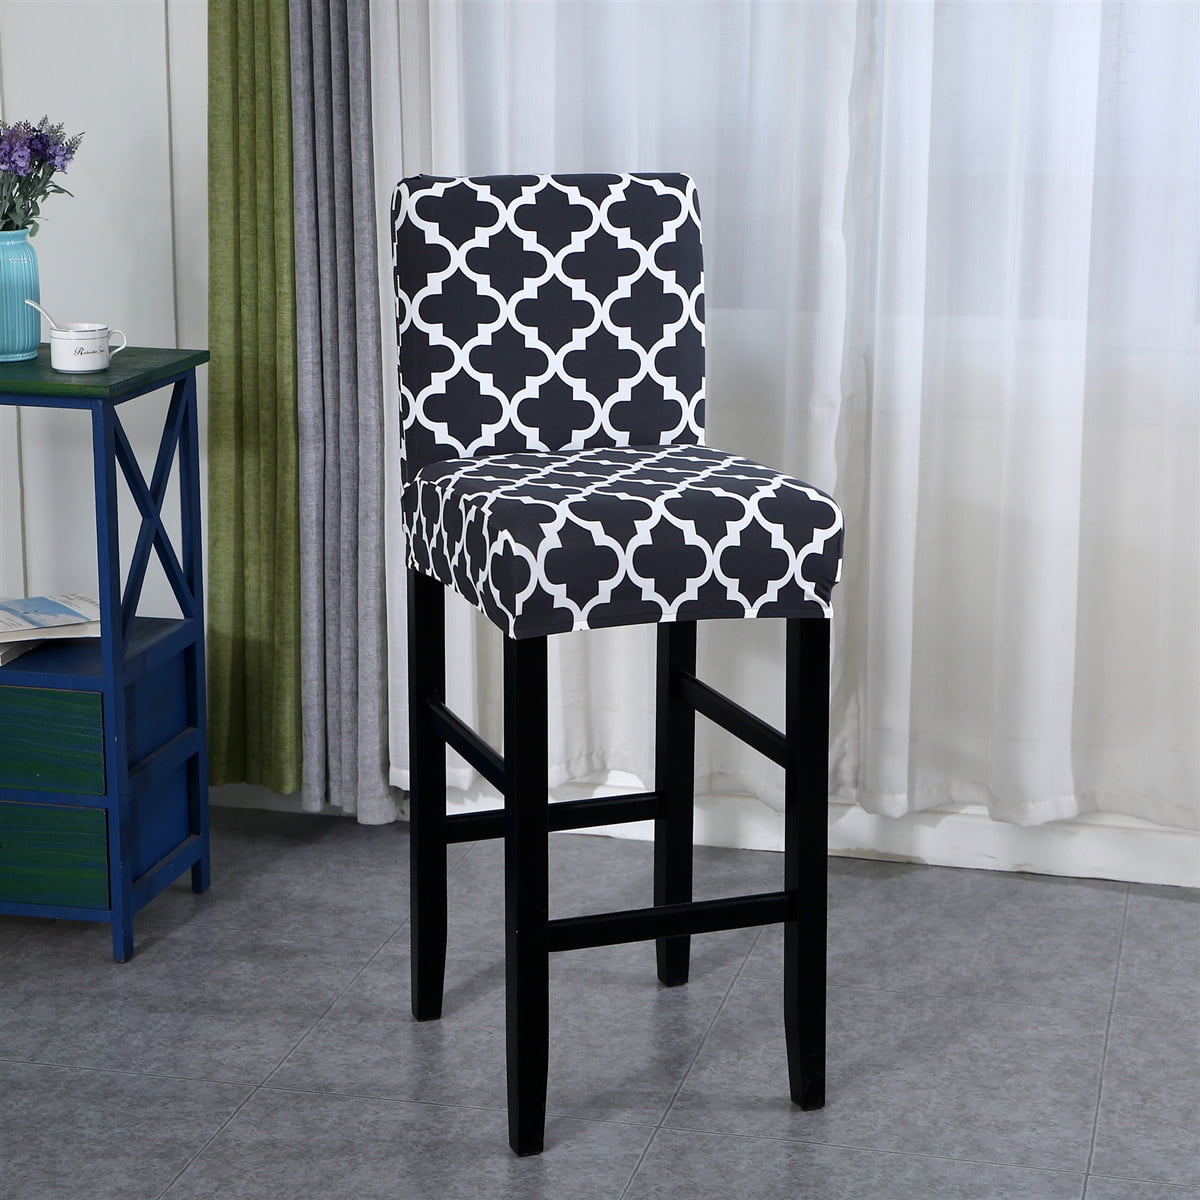 Details about  / Slipcover Dining Chair Crushed Velvet Slip Covers Seat Elastic Stretch Removable